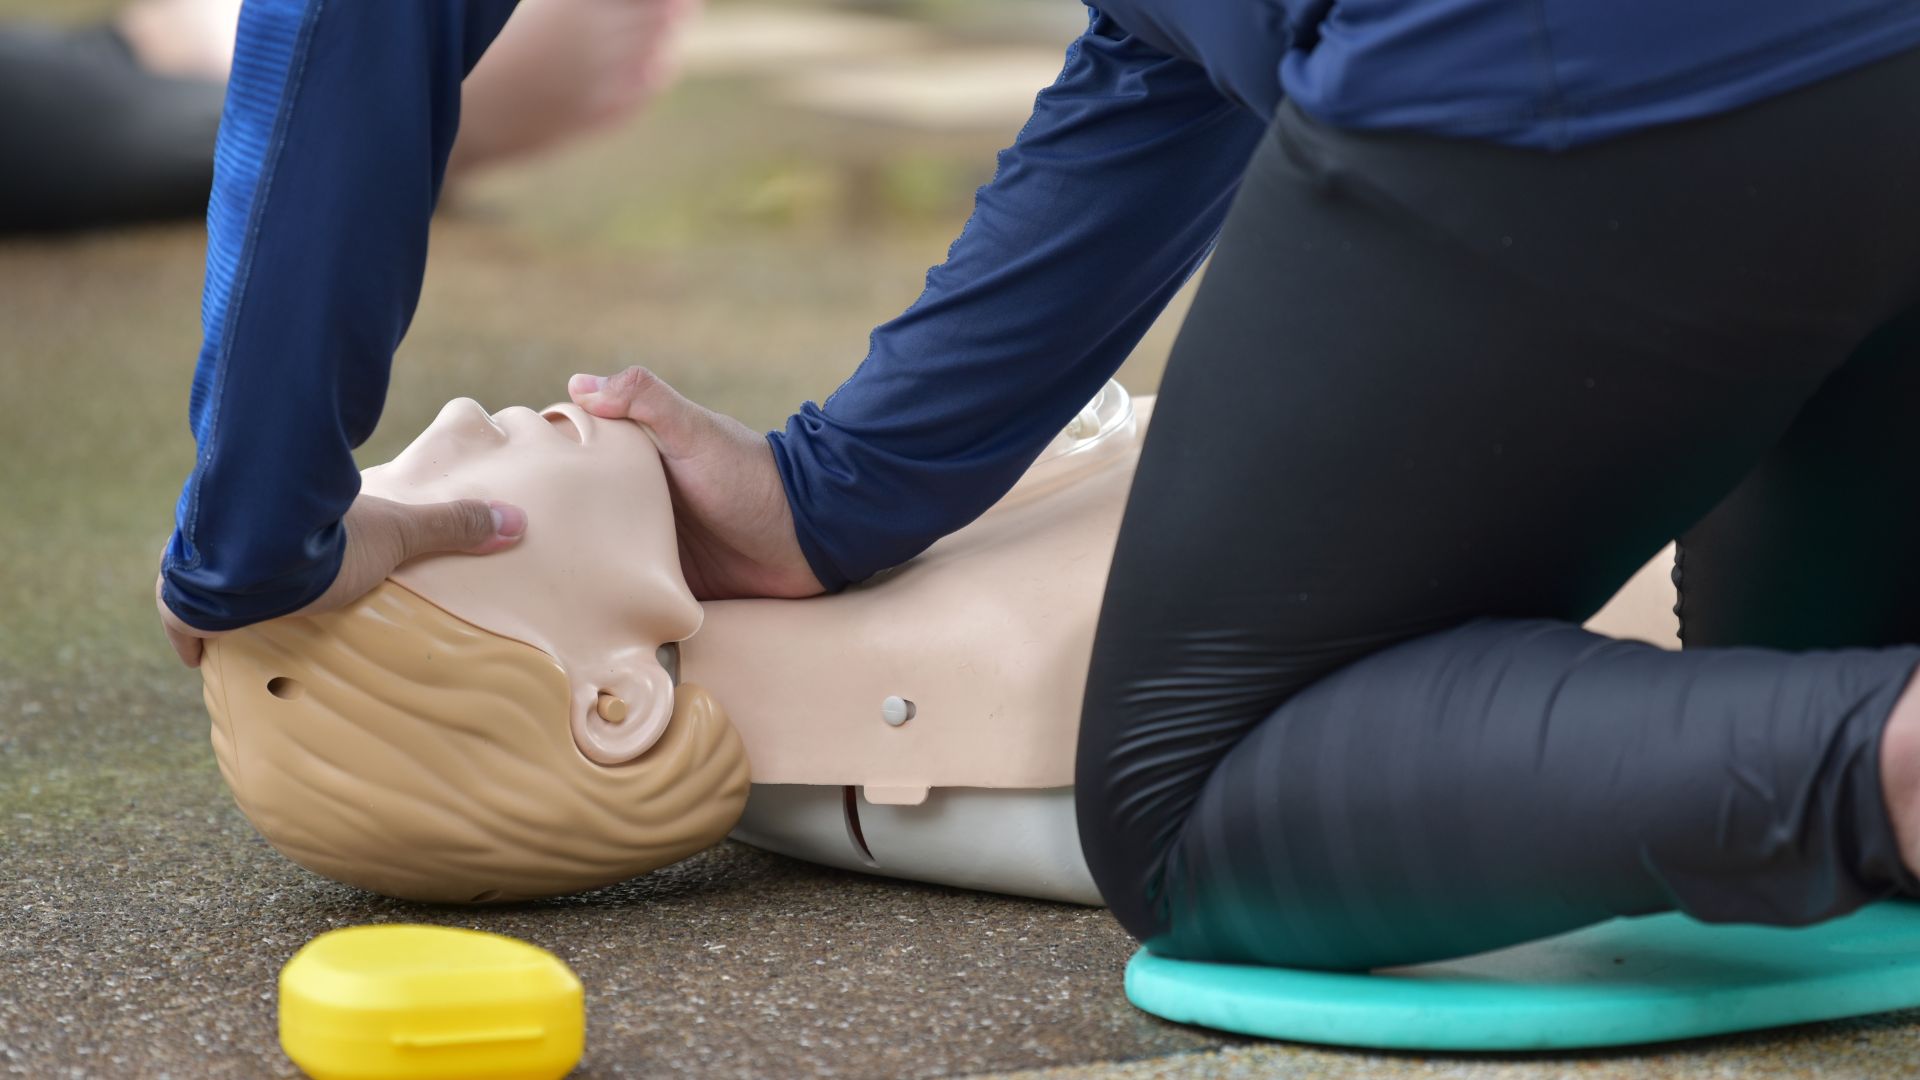 Can you preform CPR on someone in anaphylaxis?